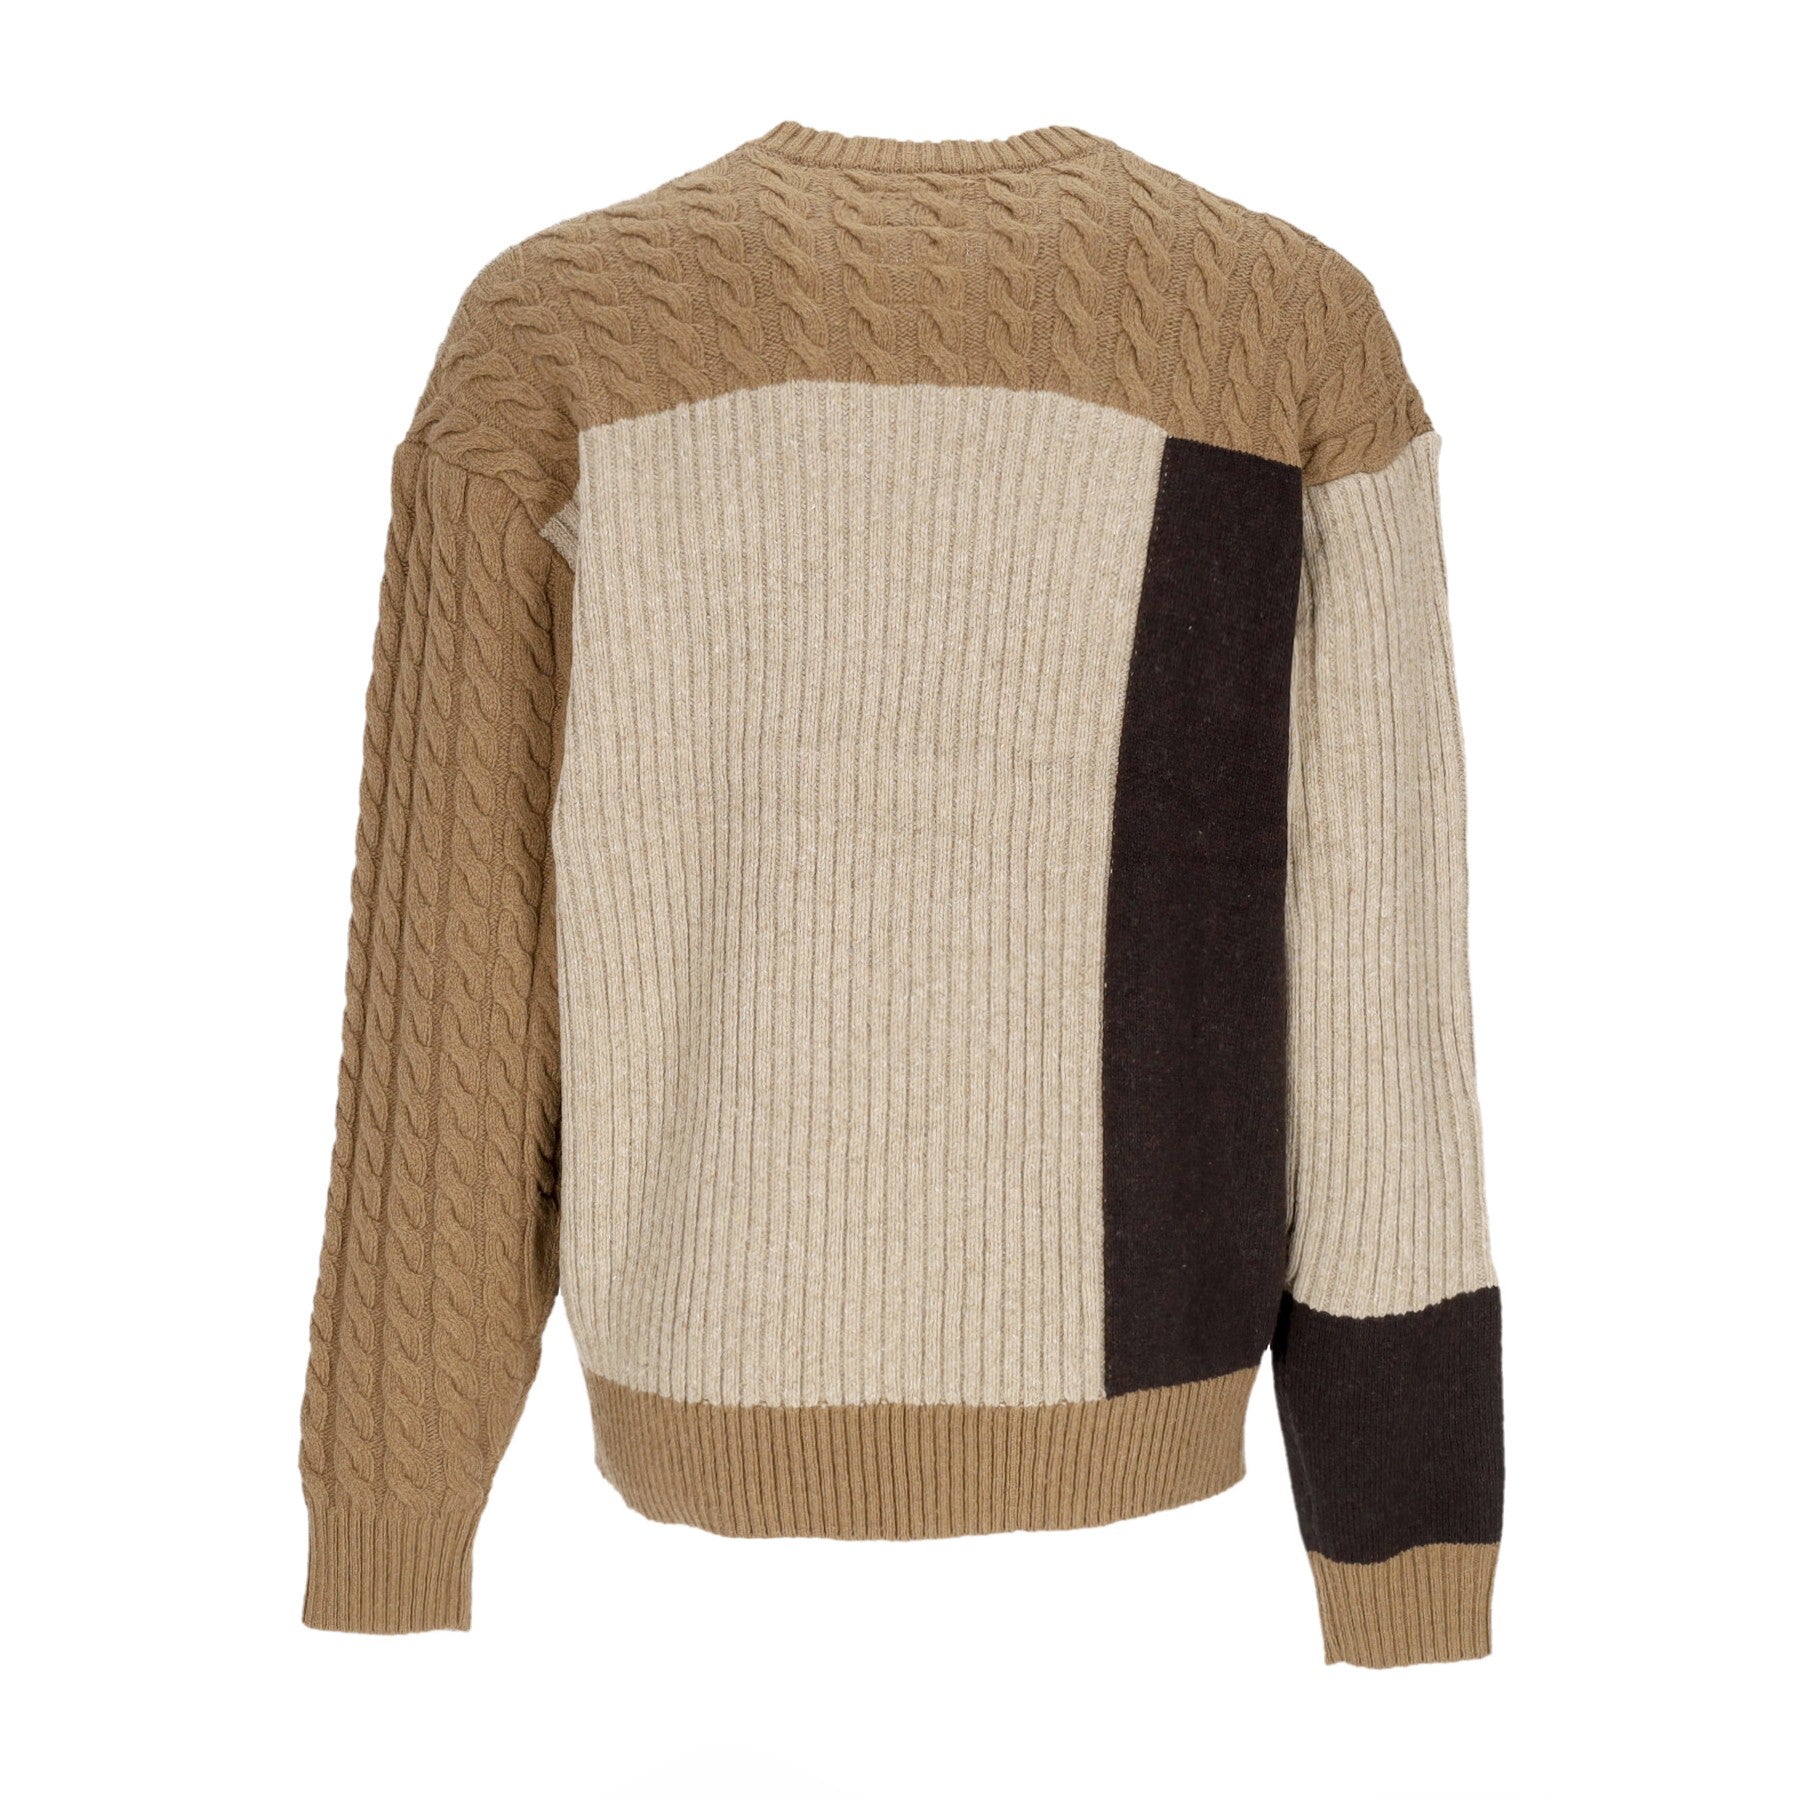 Dickies, Maglione Uomo Lucas Patchwork Sweater, 